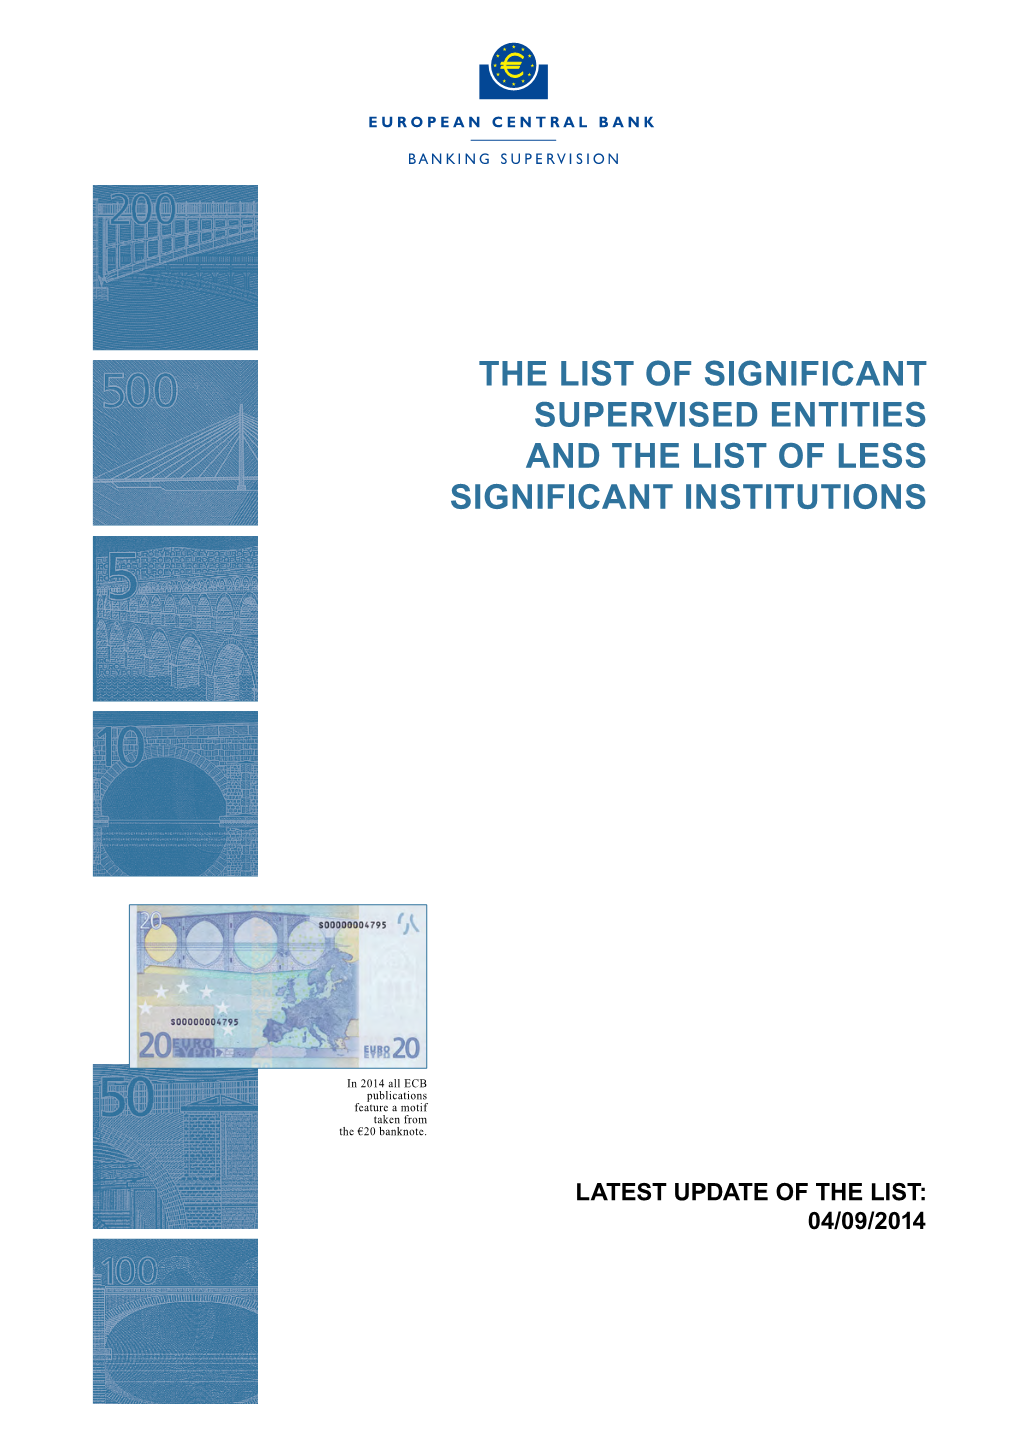 The List of Significant Supervised Entities and the List of Less Significant Institutions